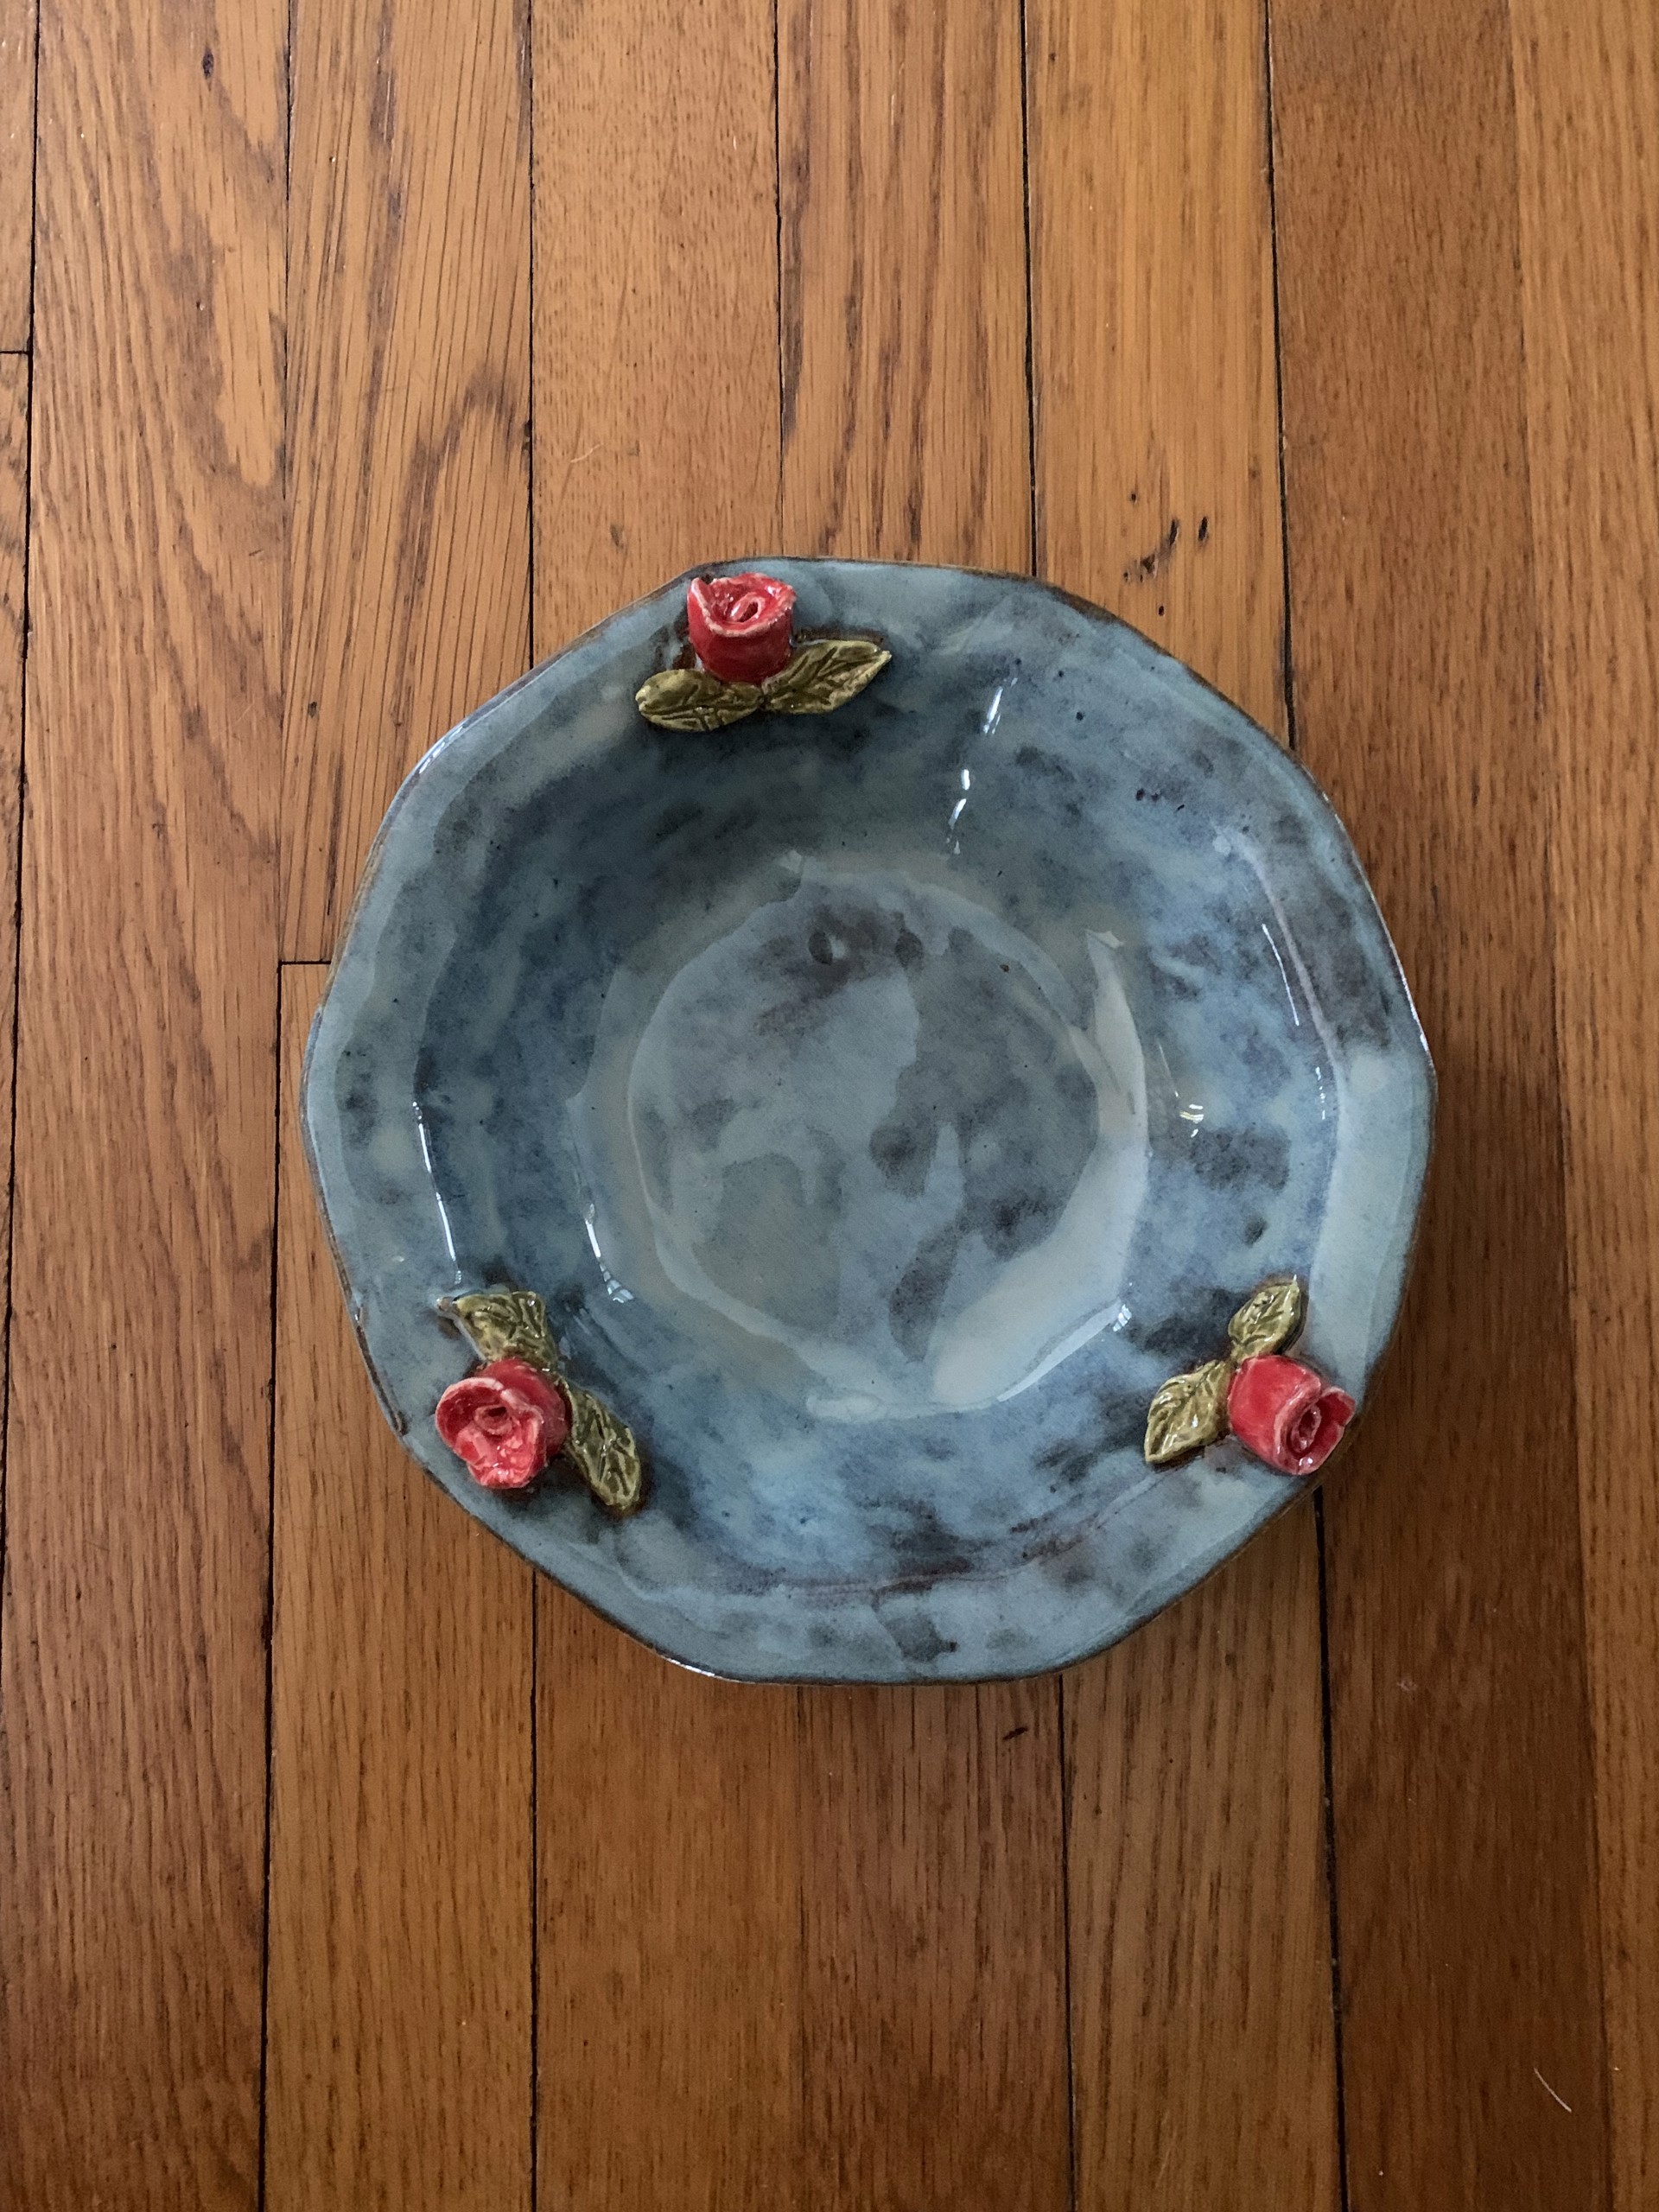 9 in Bowl with Roses, blue rutile by Michael Hagan